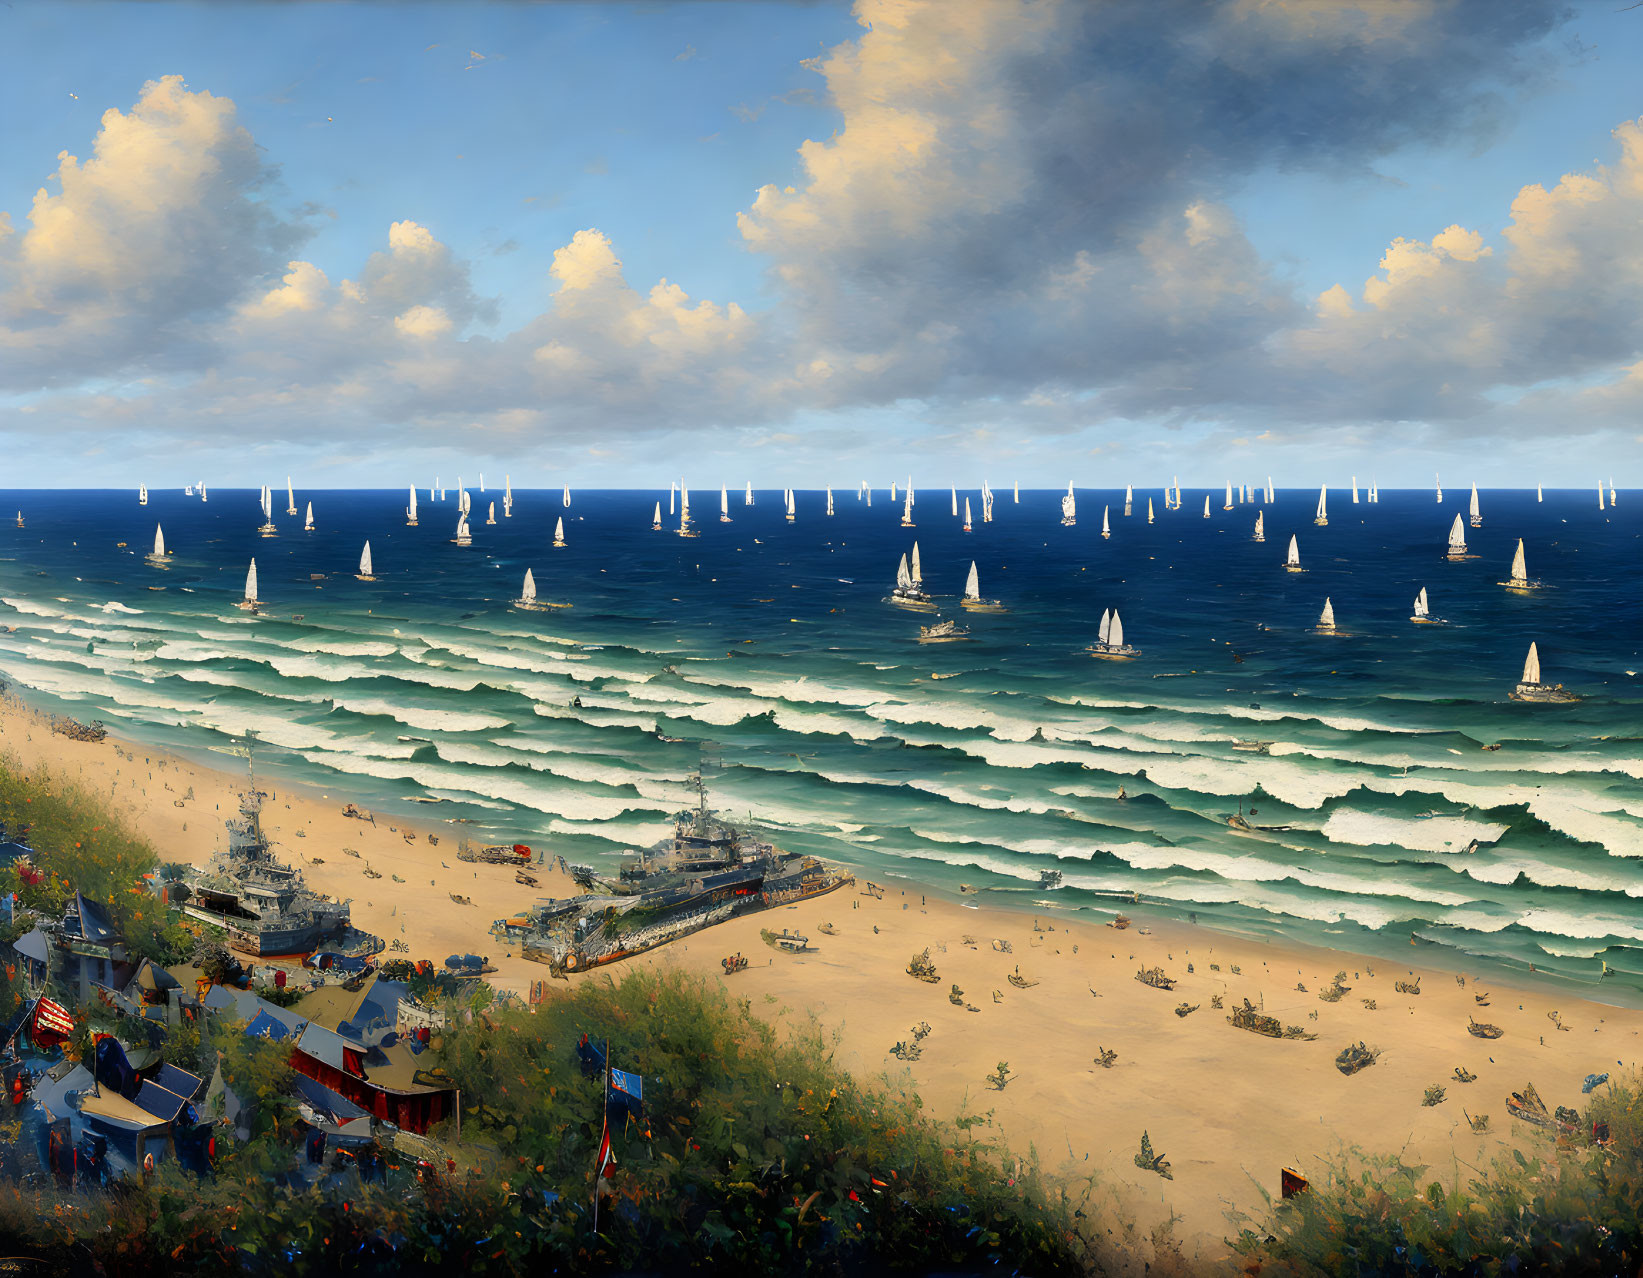 Sailboats on waves at beach with cloudy sky